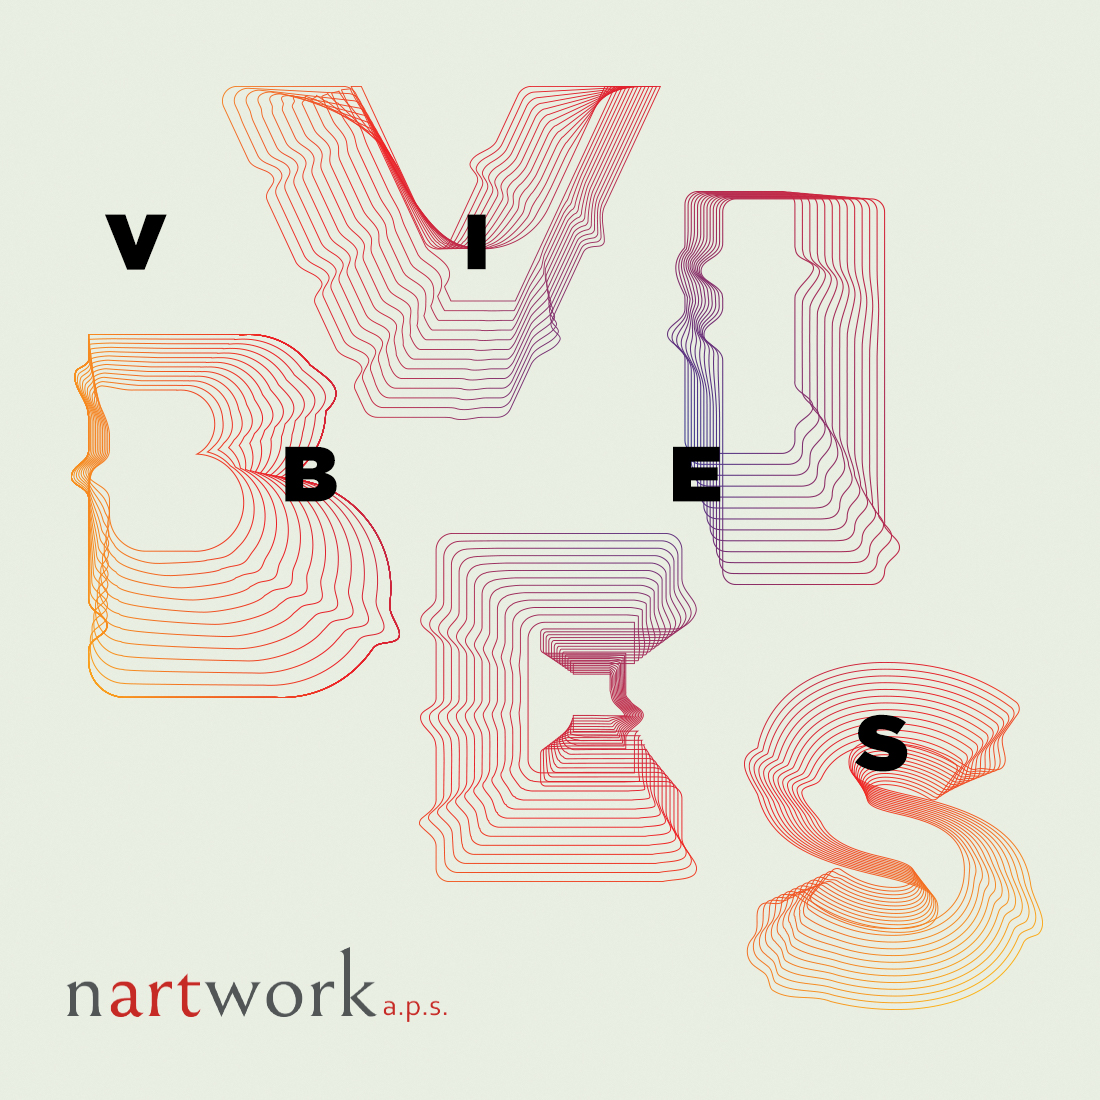 vibes nartwork exhibition